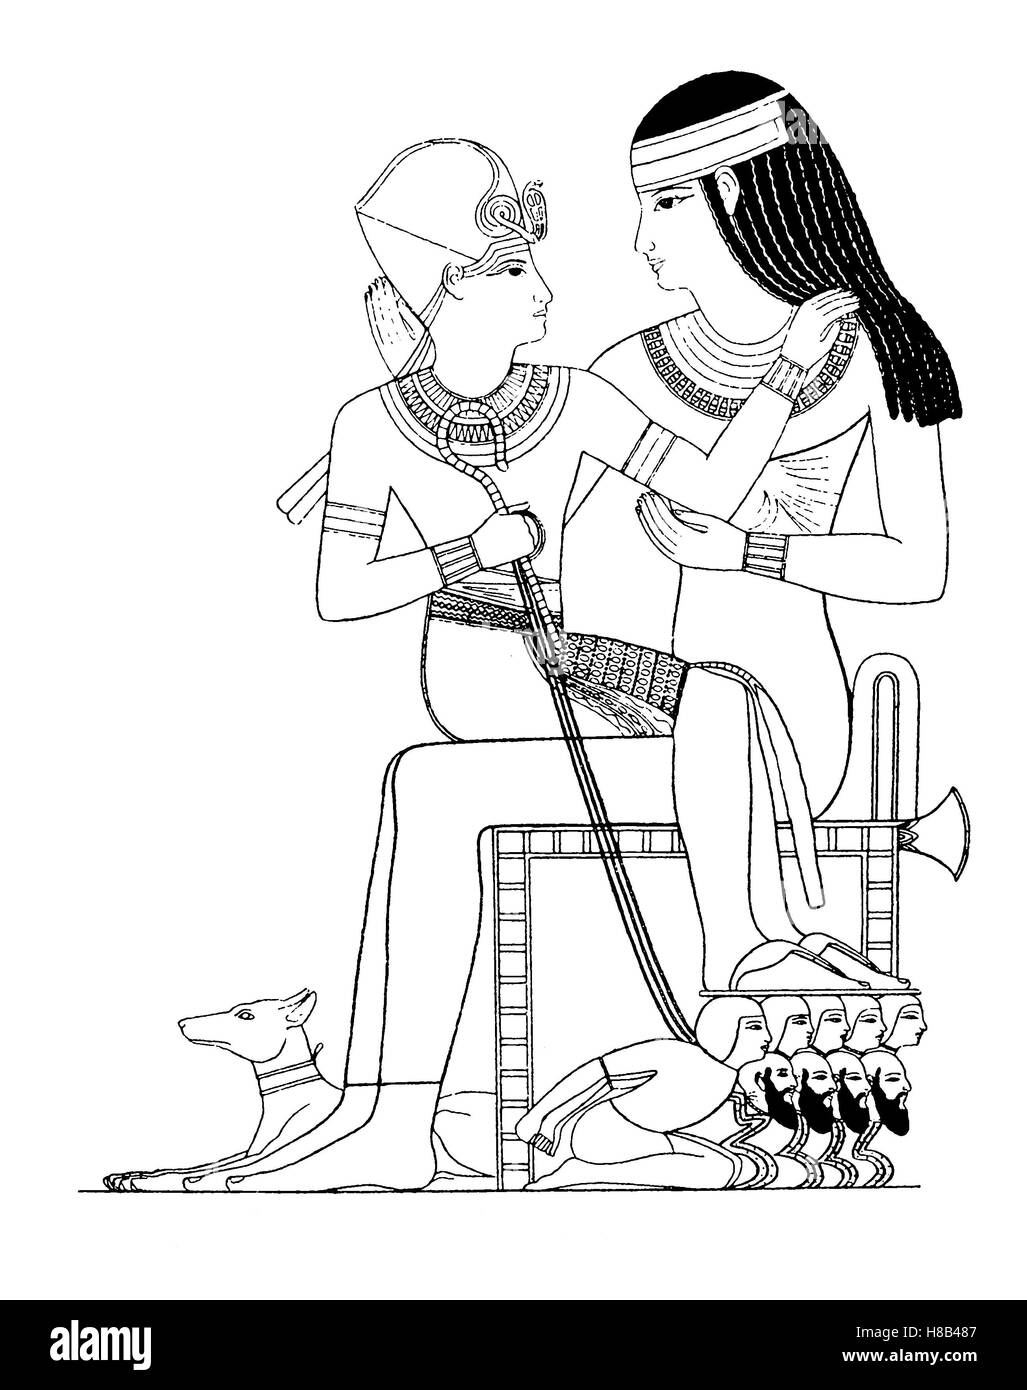 Amenophis II, Amenhotep, was the seventh ancient Egyptian queen, Pharaoh, the 18th dynasty, here with as a child with his educator, History of fashion, costume story Stock Photo